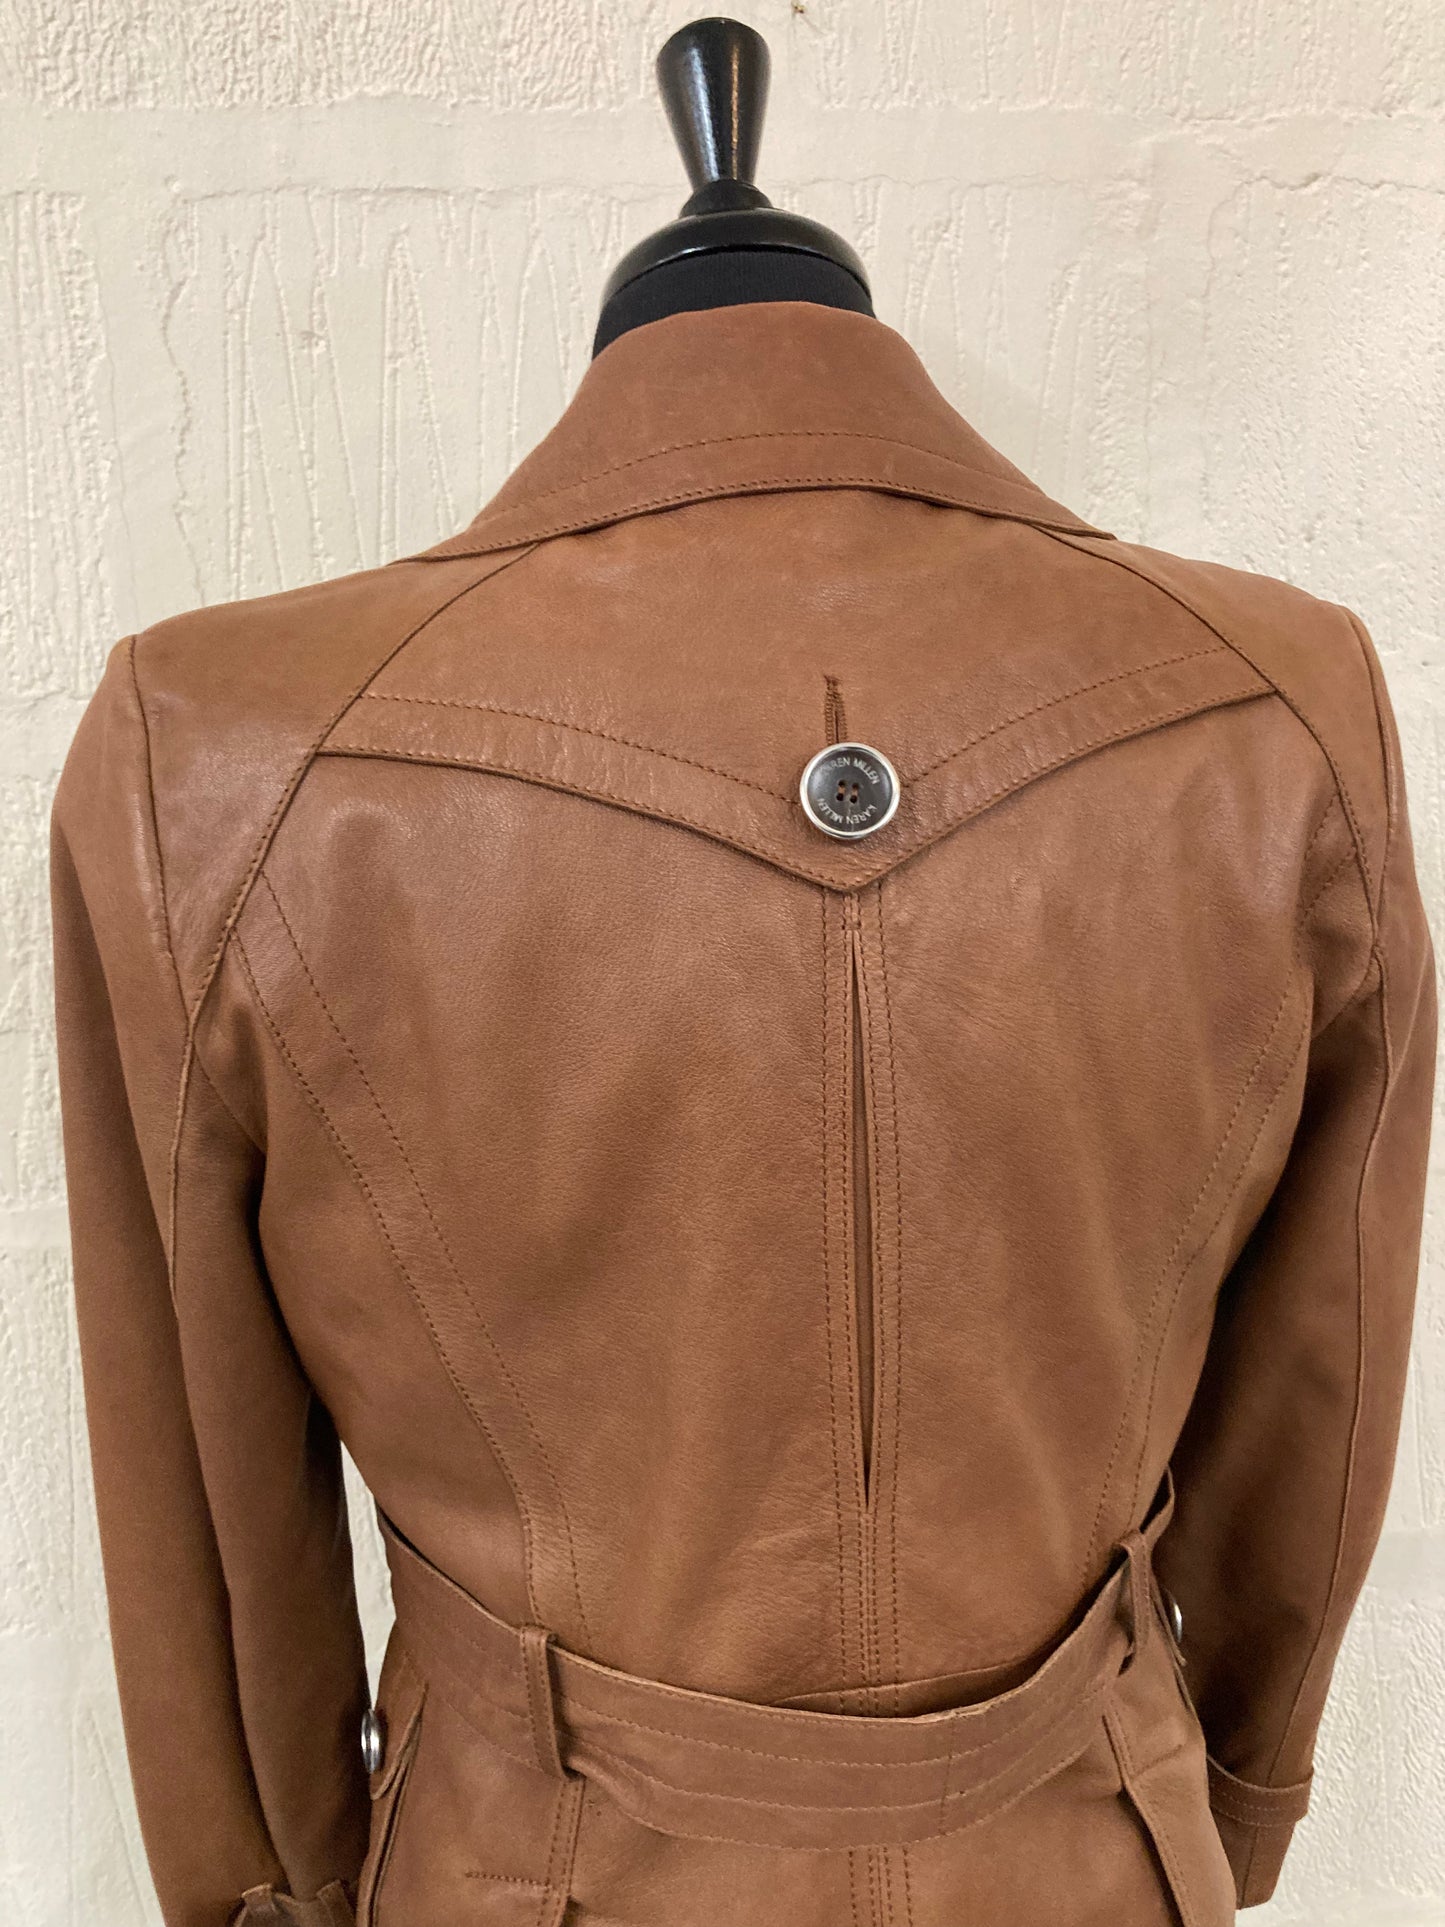 1970s style Karen Millen Tan Leather Double Breasted Belted Jacket Size 12